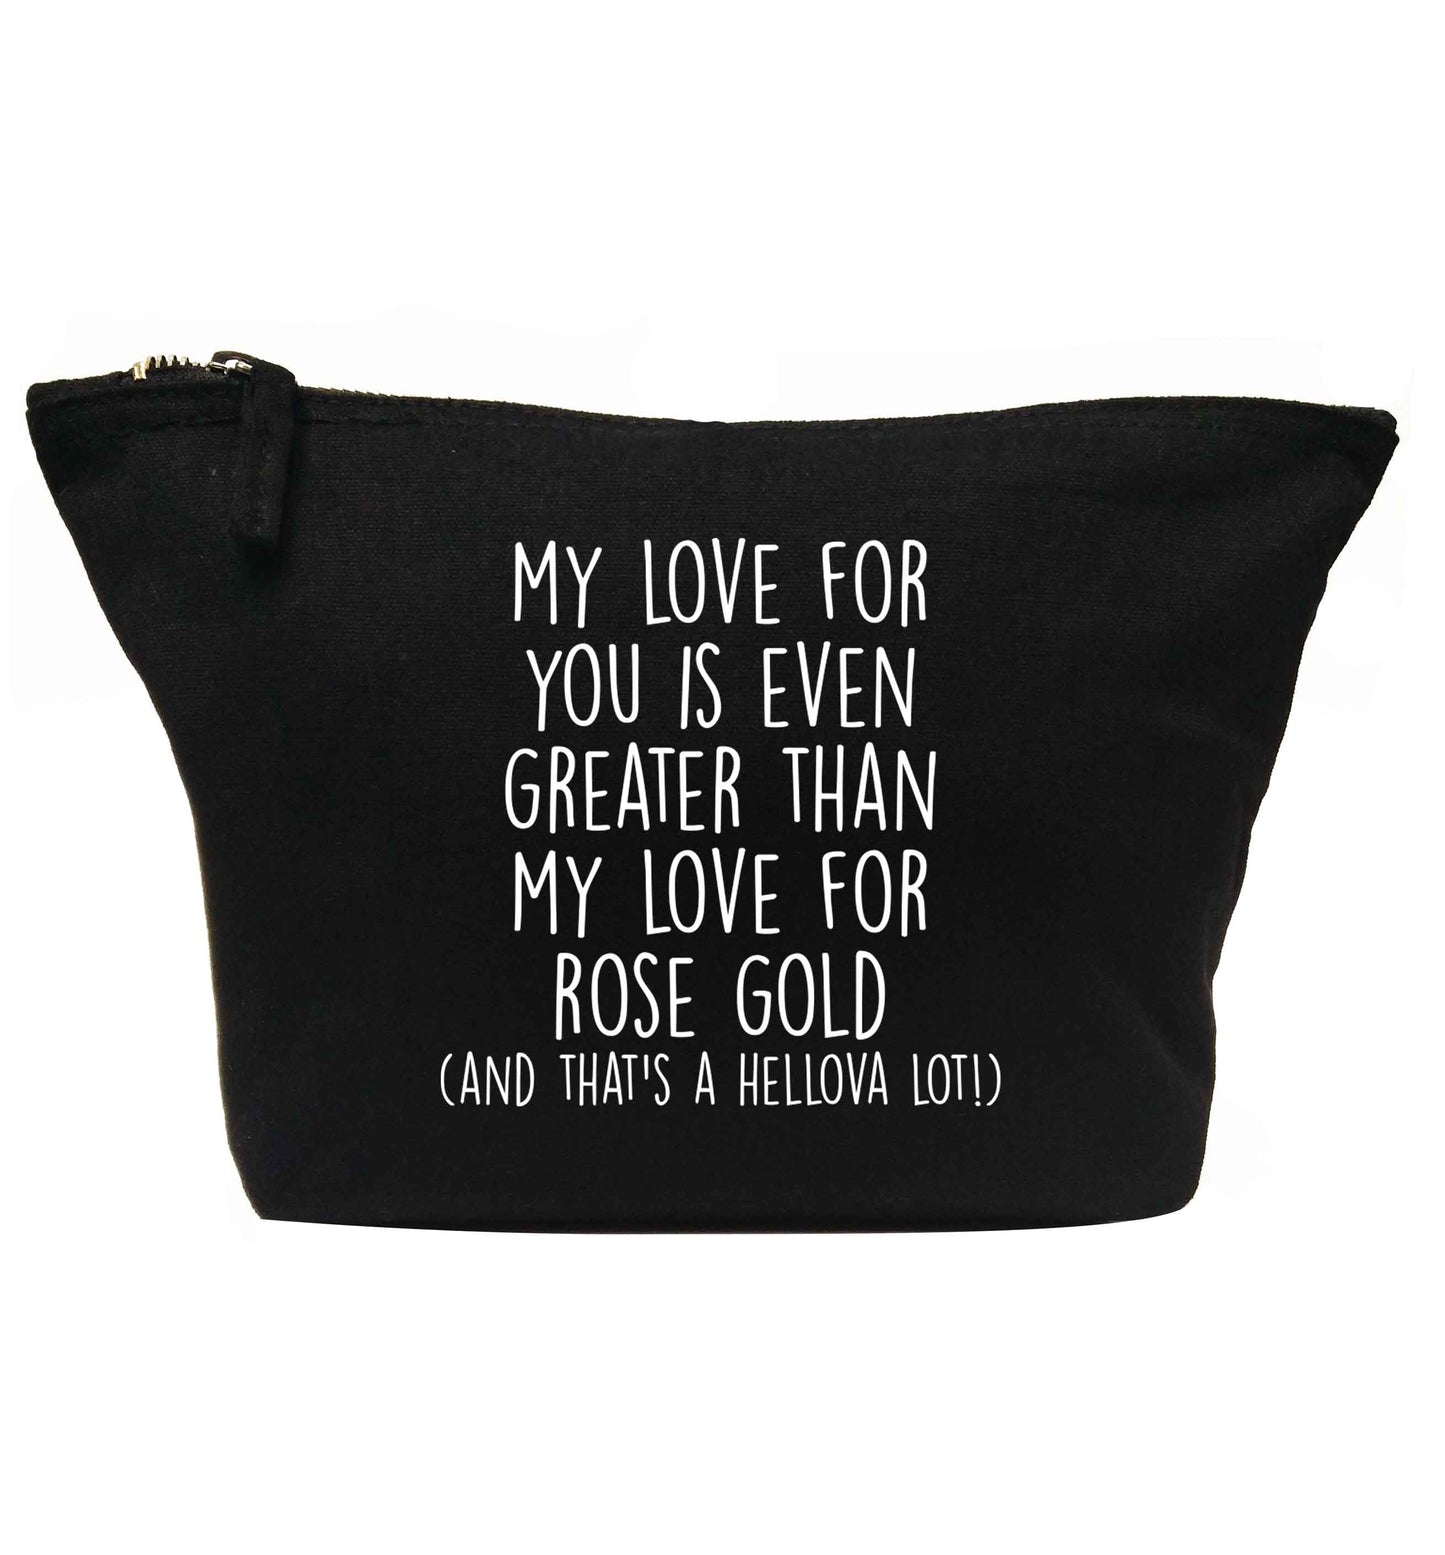 My love for you is even greater than my love for rose gold (and that's a hellova lot) | Makeup / wash bag